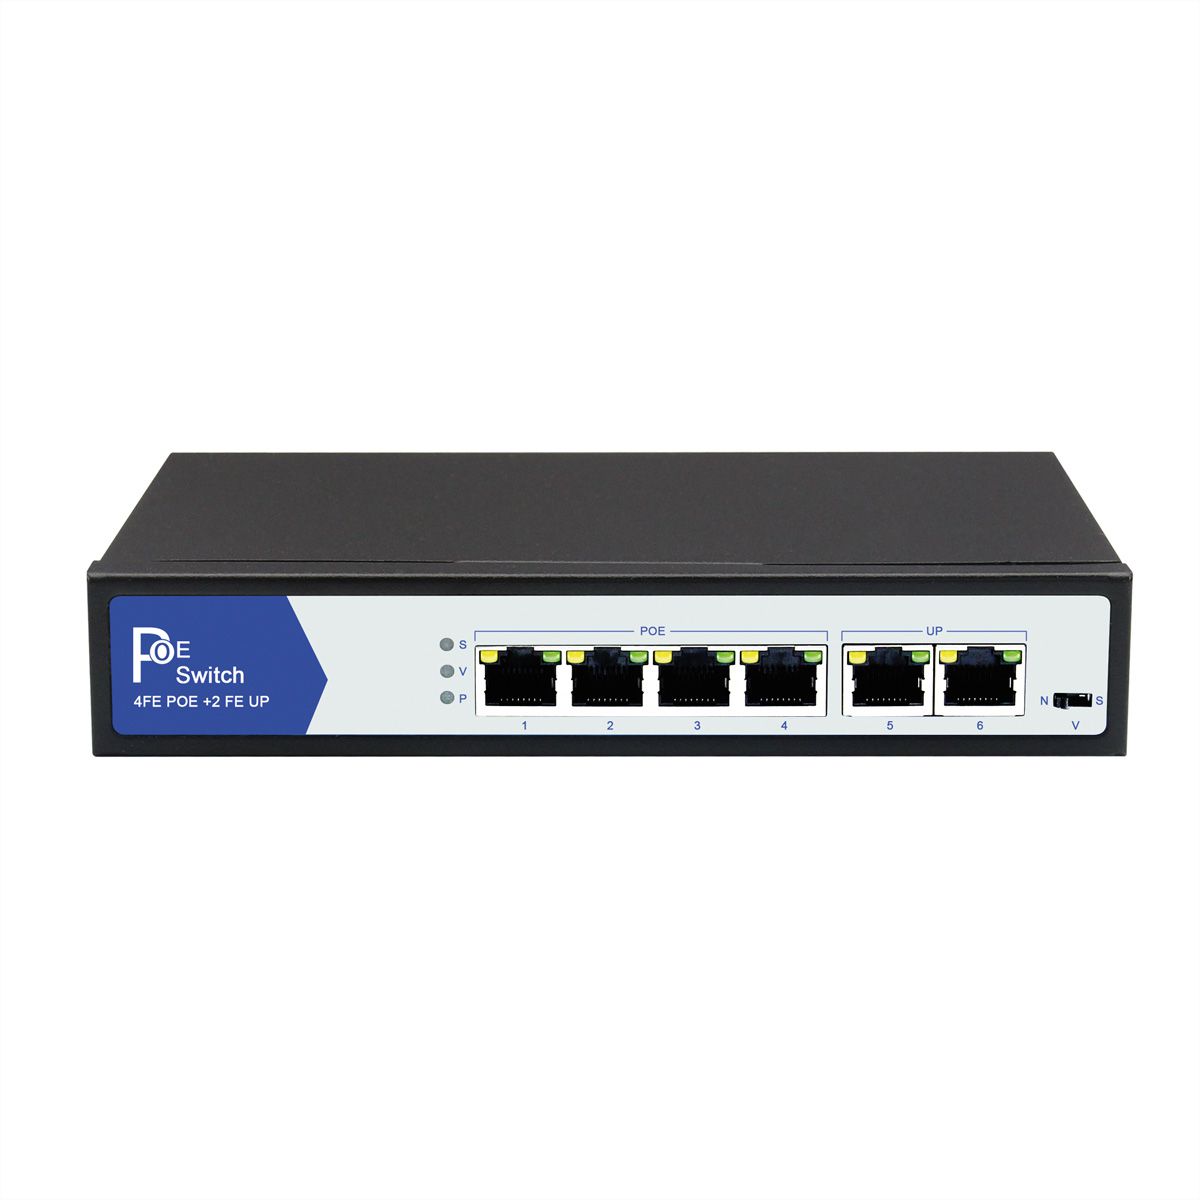 ethernet status no network access